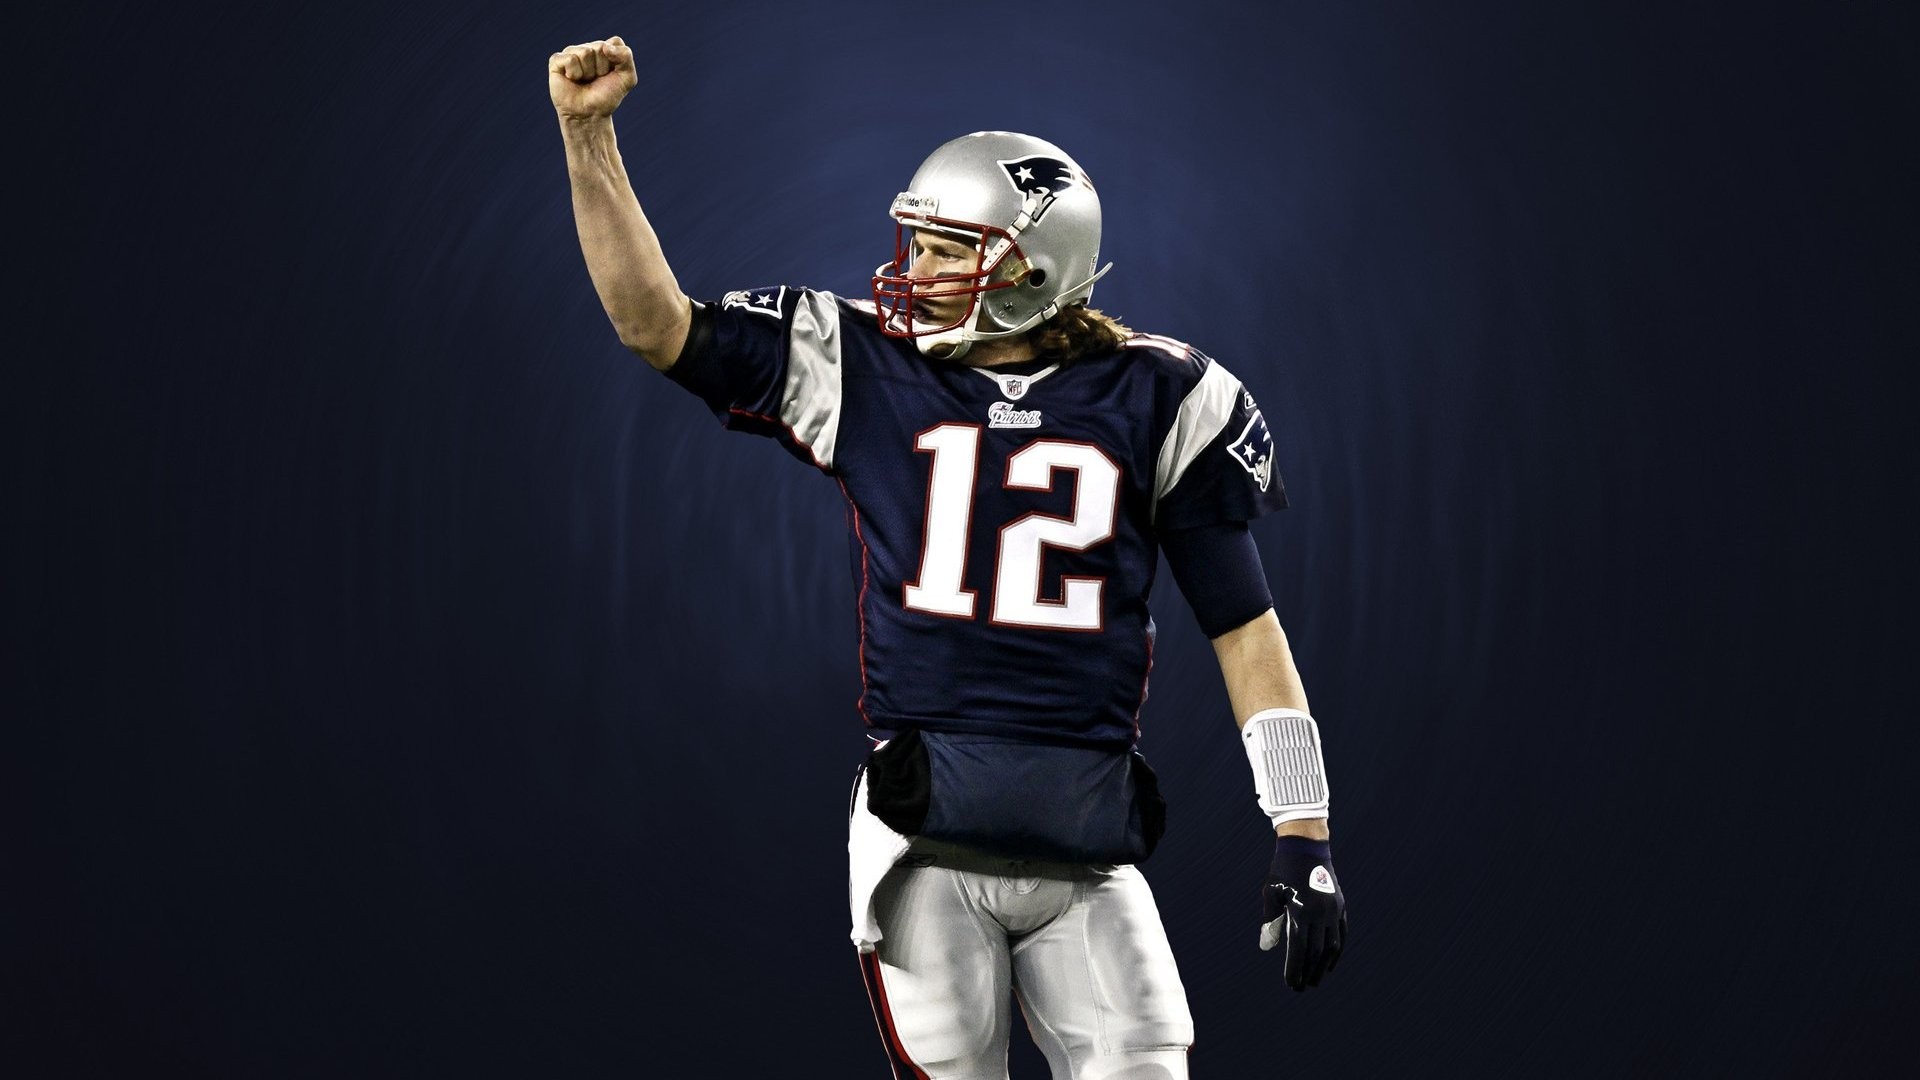 Tom Brady Super Bowl Wallpaper with image resolution 1920x1080 pixel. You can use this wallpaper as background for your desktop Computer Screensavers, Android or iPhone smartphones